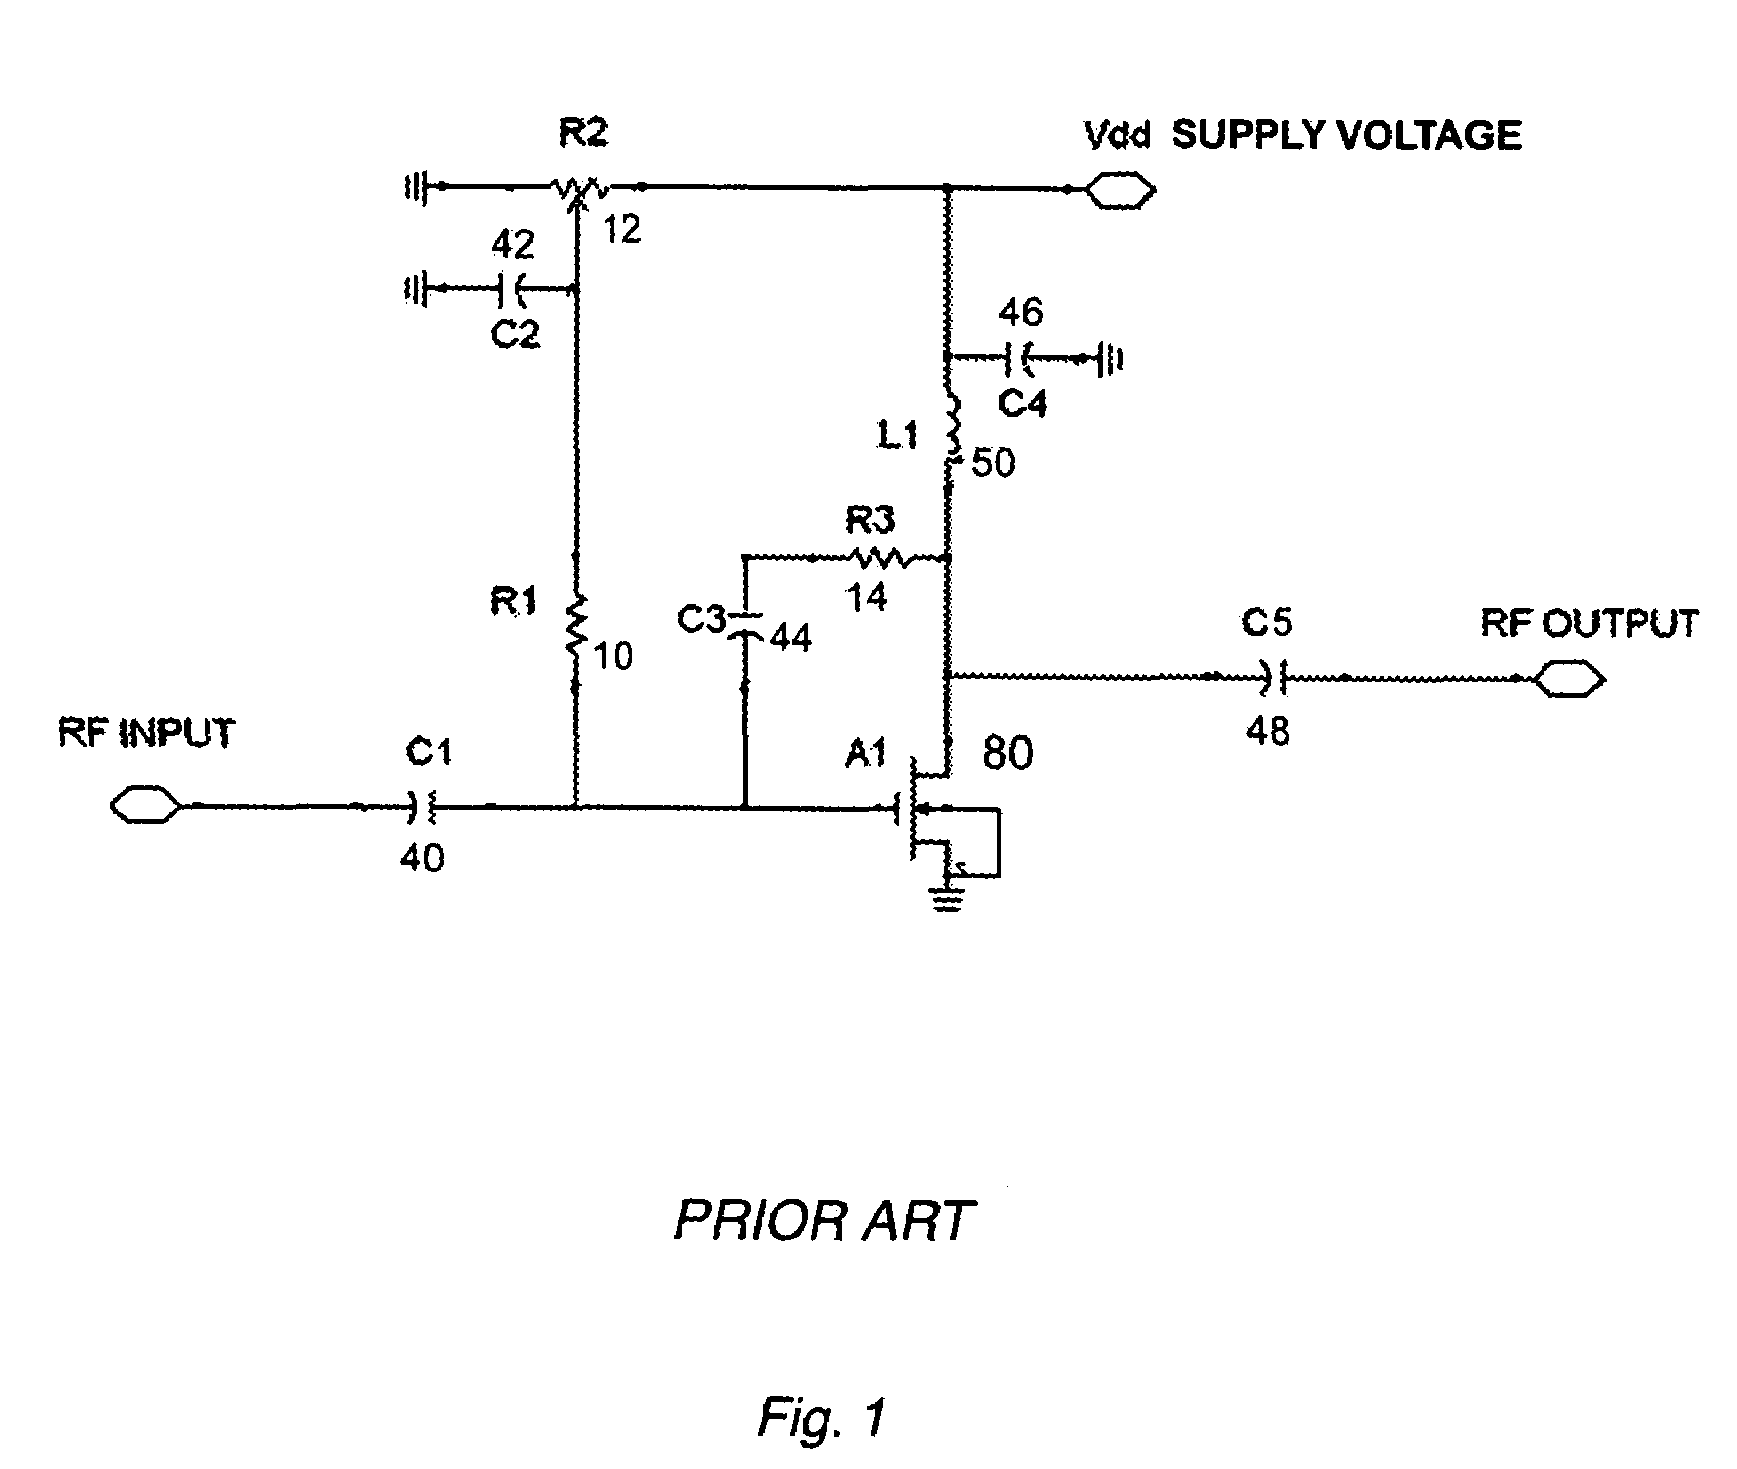 Automatic biasing and protection circuit for field effect transistor (FET) devices